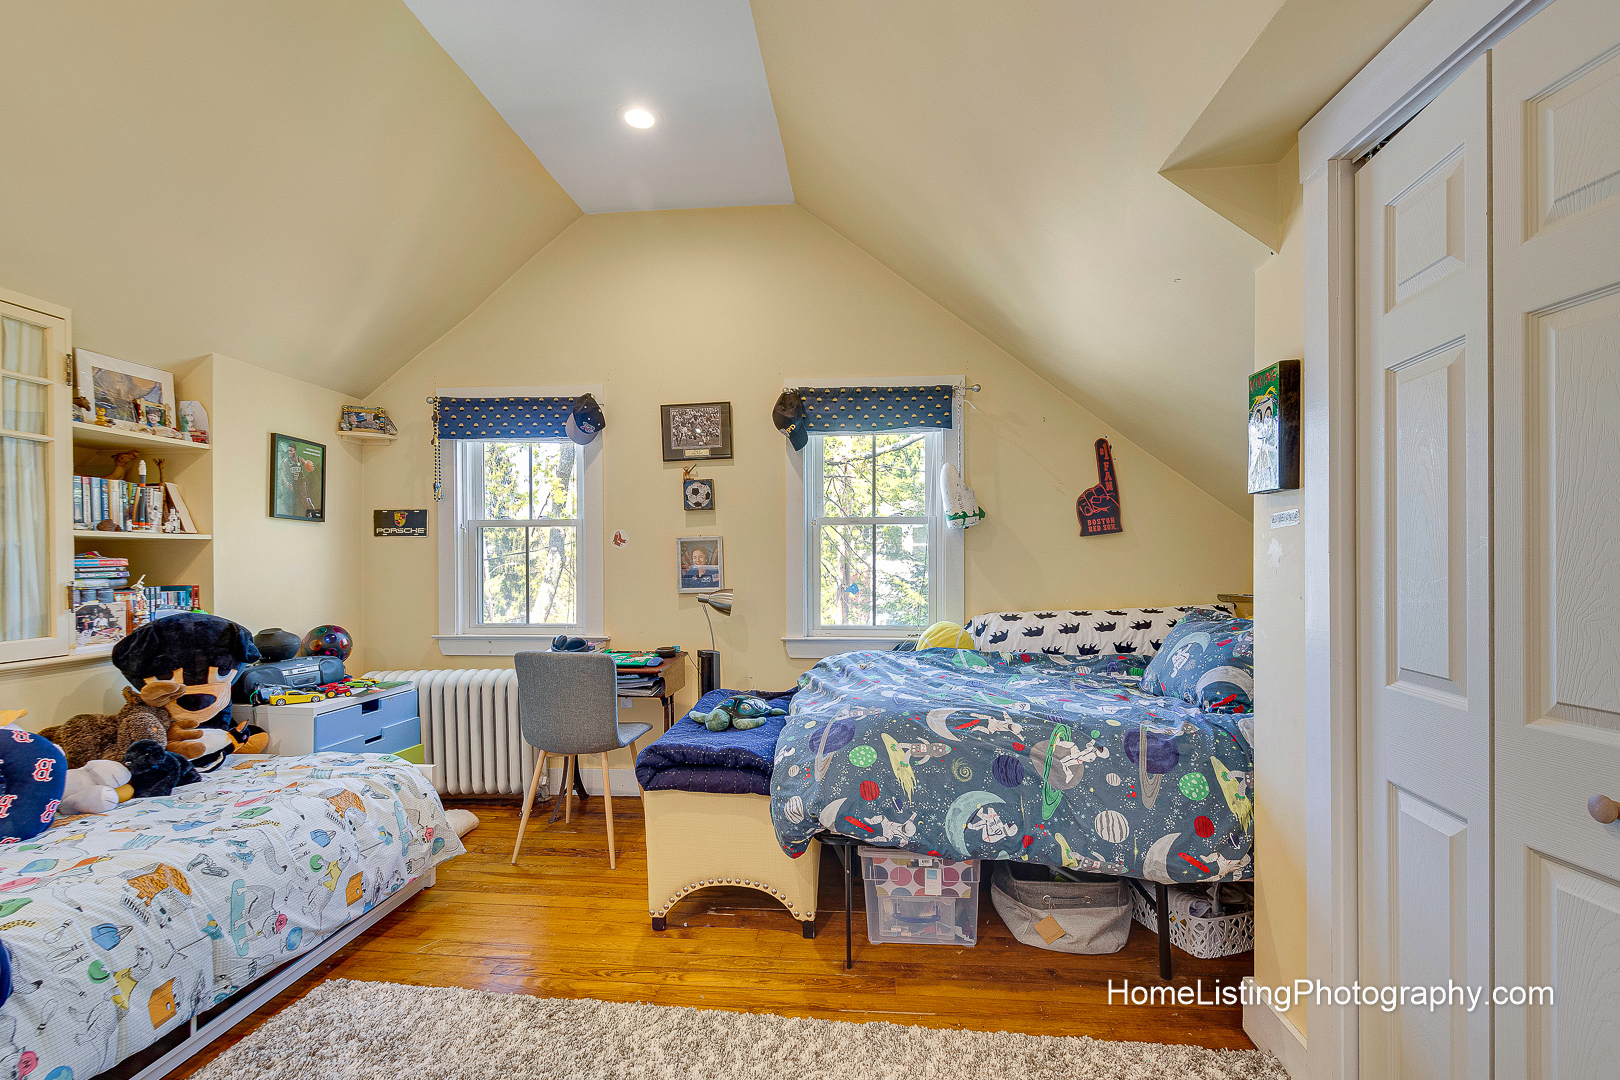 Thomas Adach - Winchester MA professional real estate photographer - 508-655-2225 Home Listing Photography